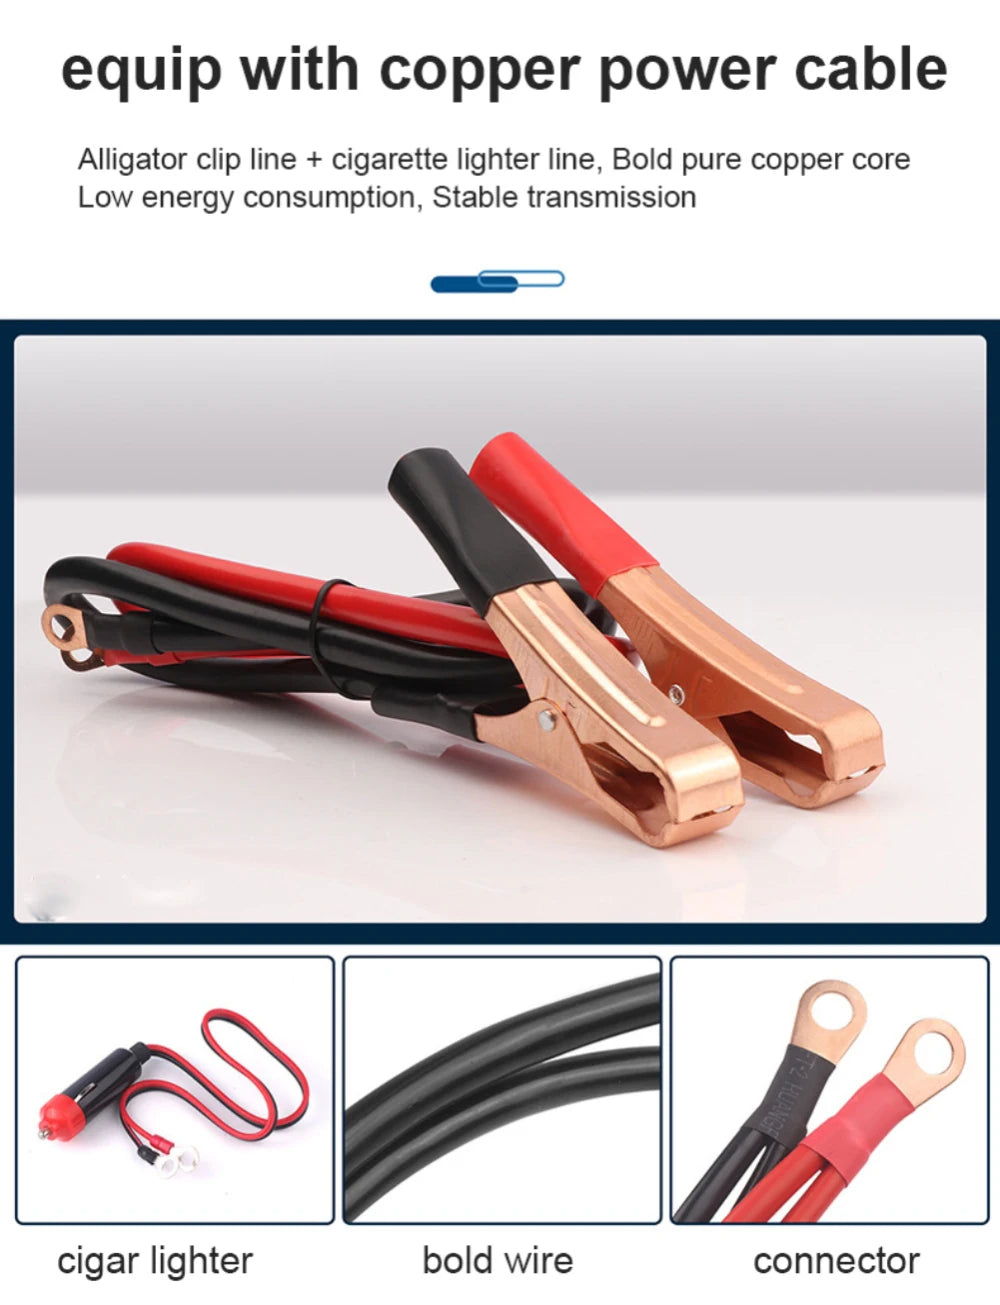 Inverter, Copper-Powered Cord Set with Clips and Adapter